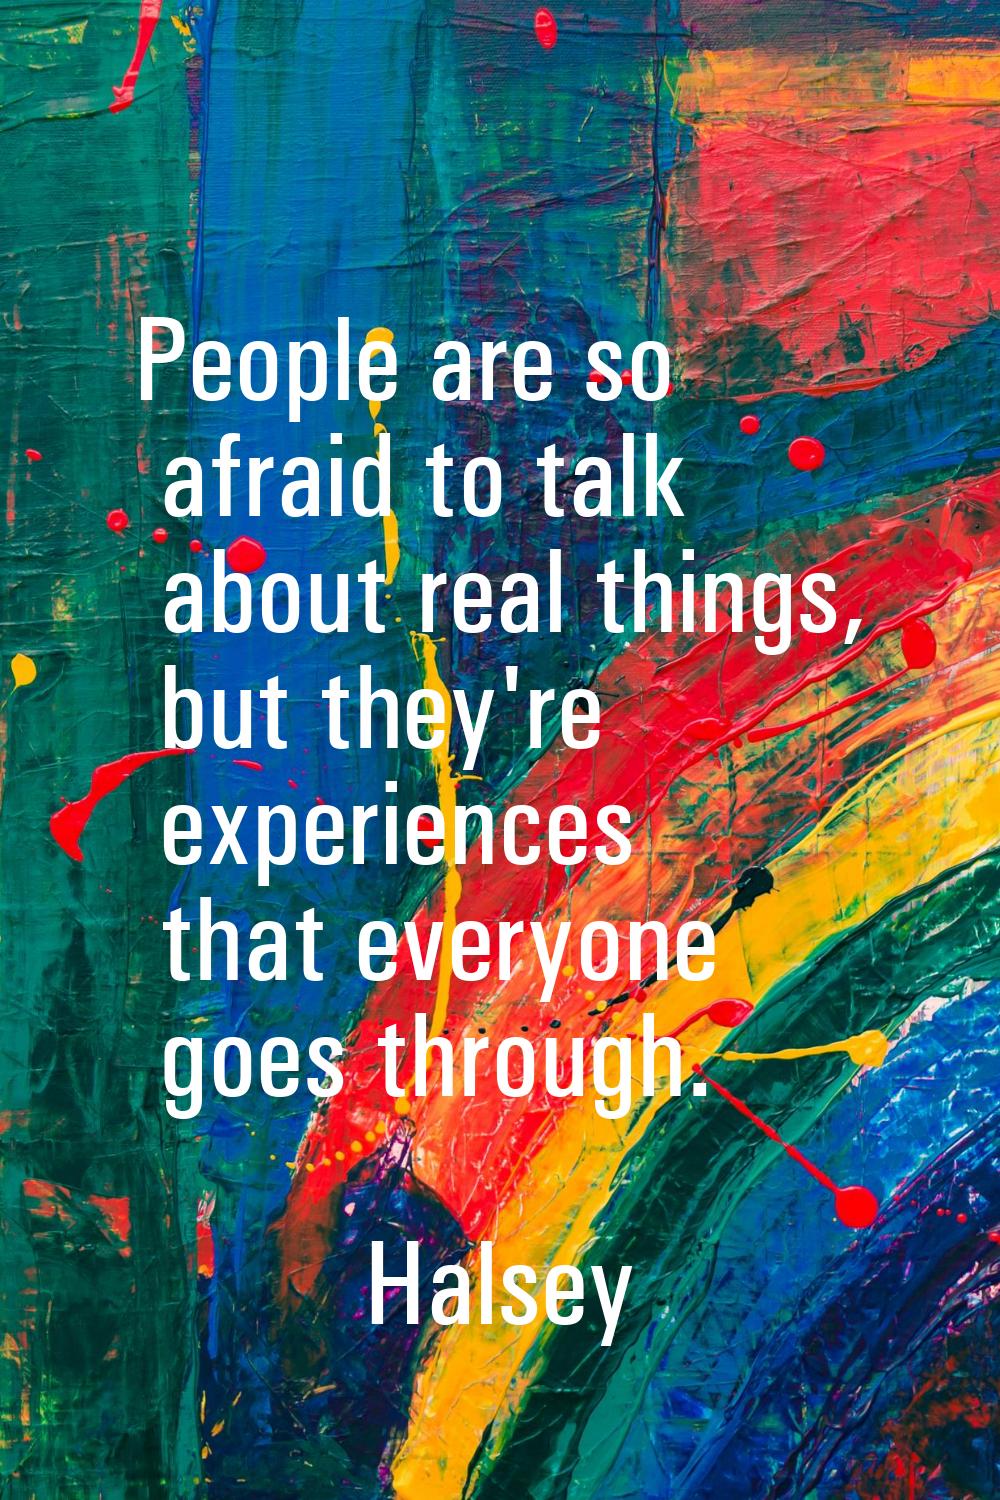 People are so afraid to talk about real things, but they're experiences that everyone goes through.